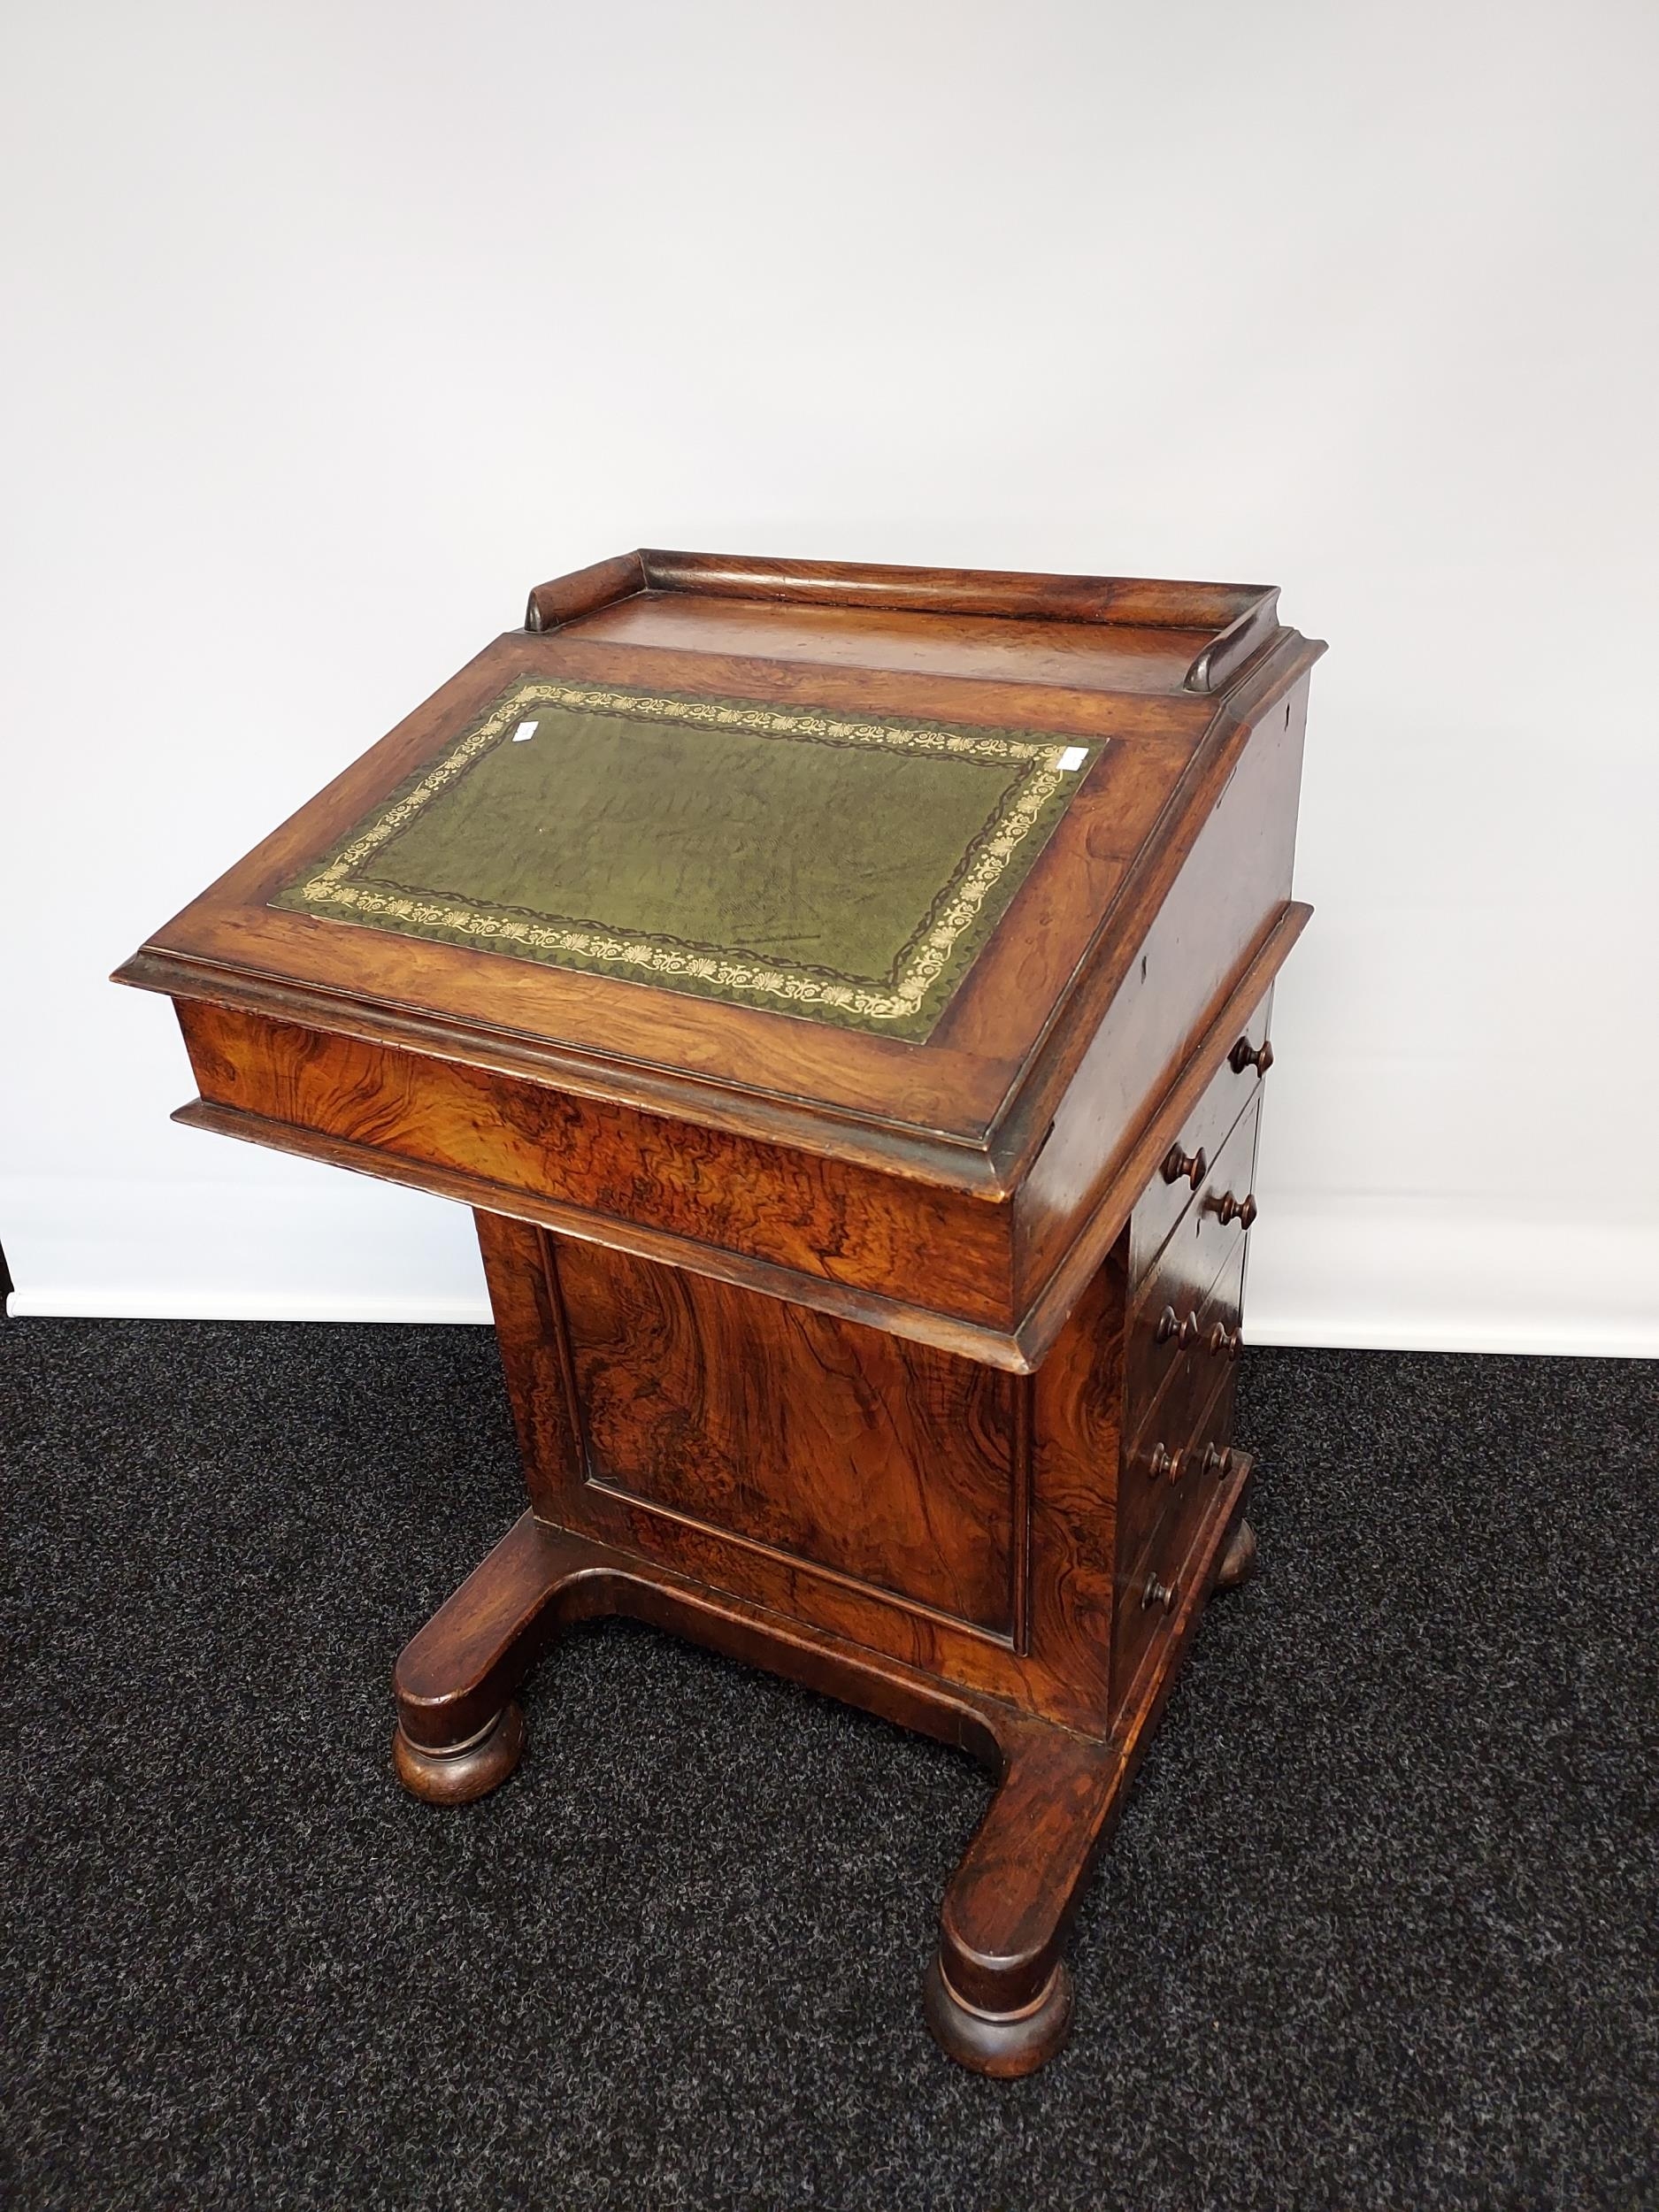 Early 19th century davenport writing desk, with sprung drawer raised section to include a secret ink - Image 19 of 24